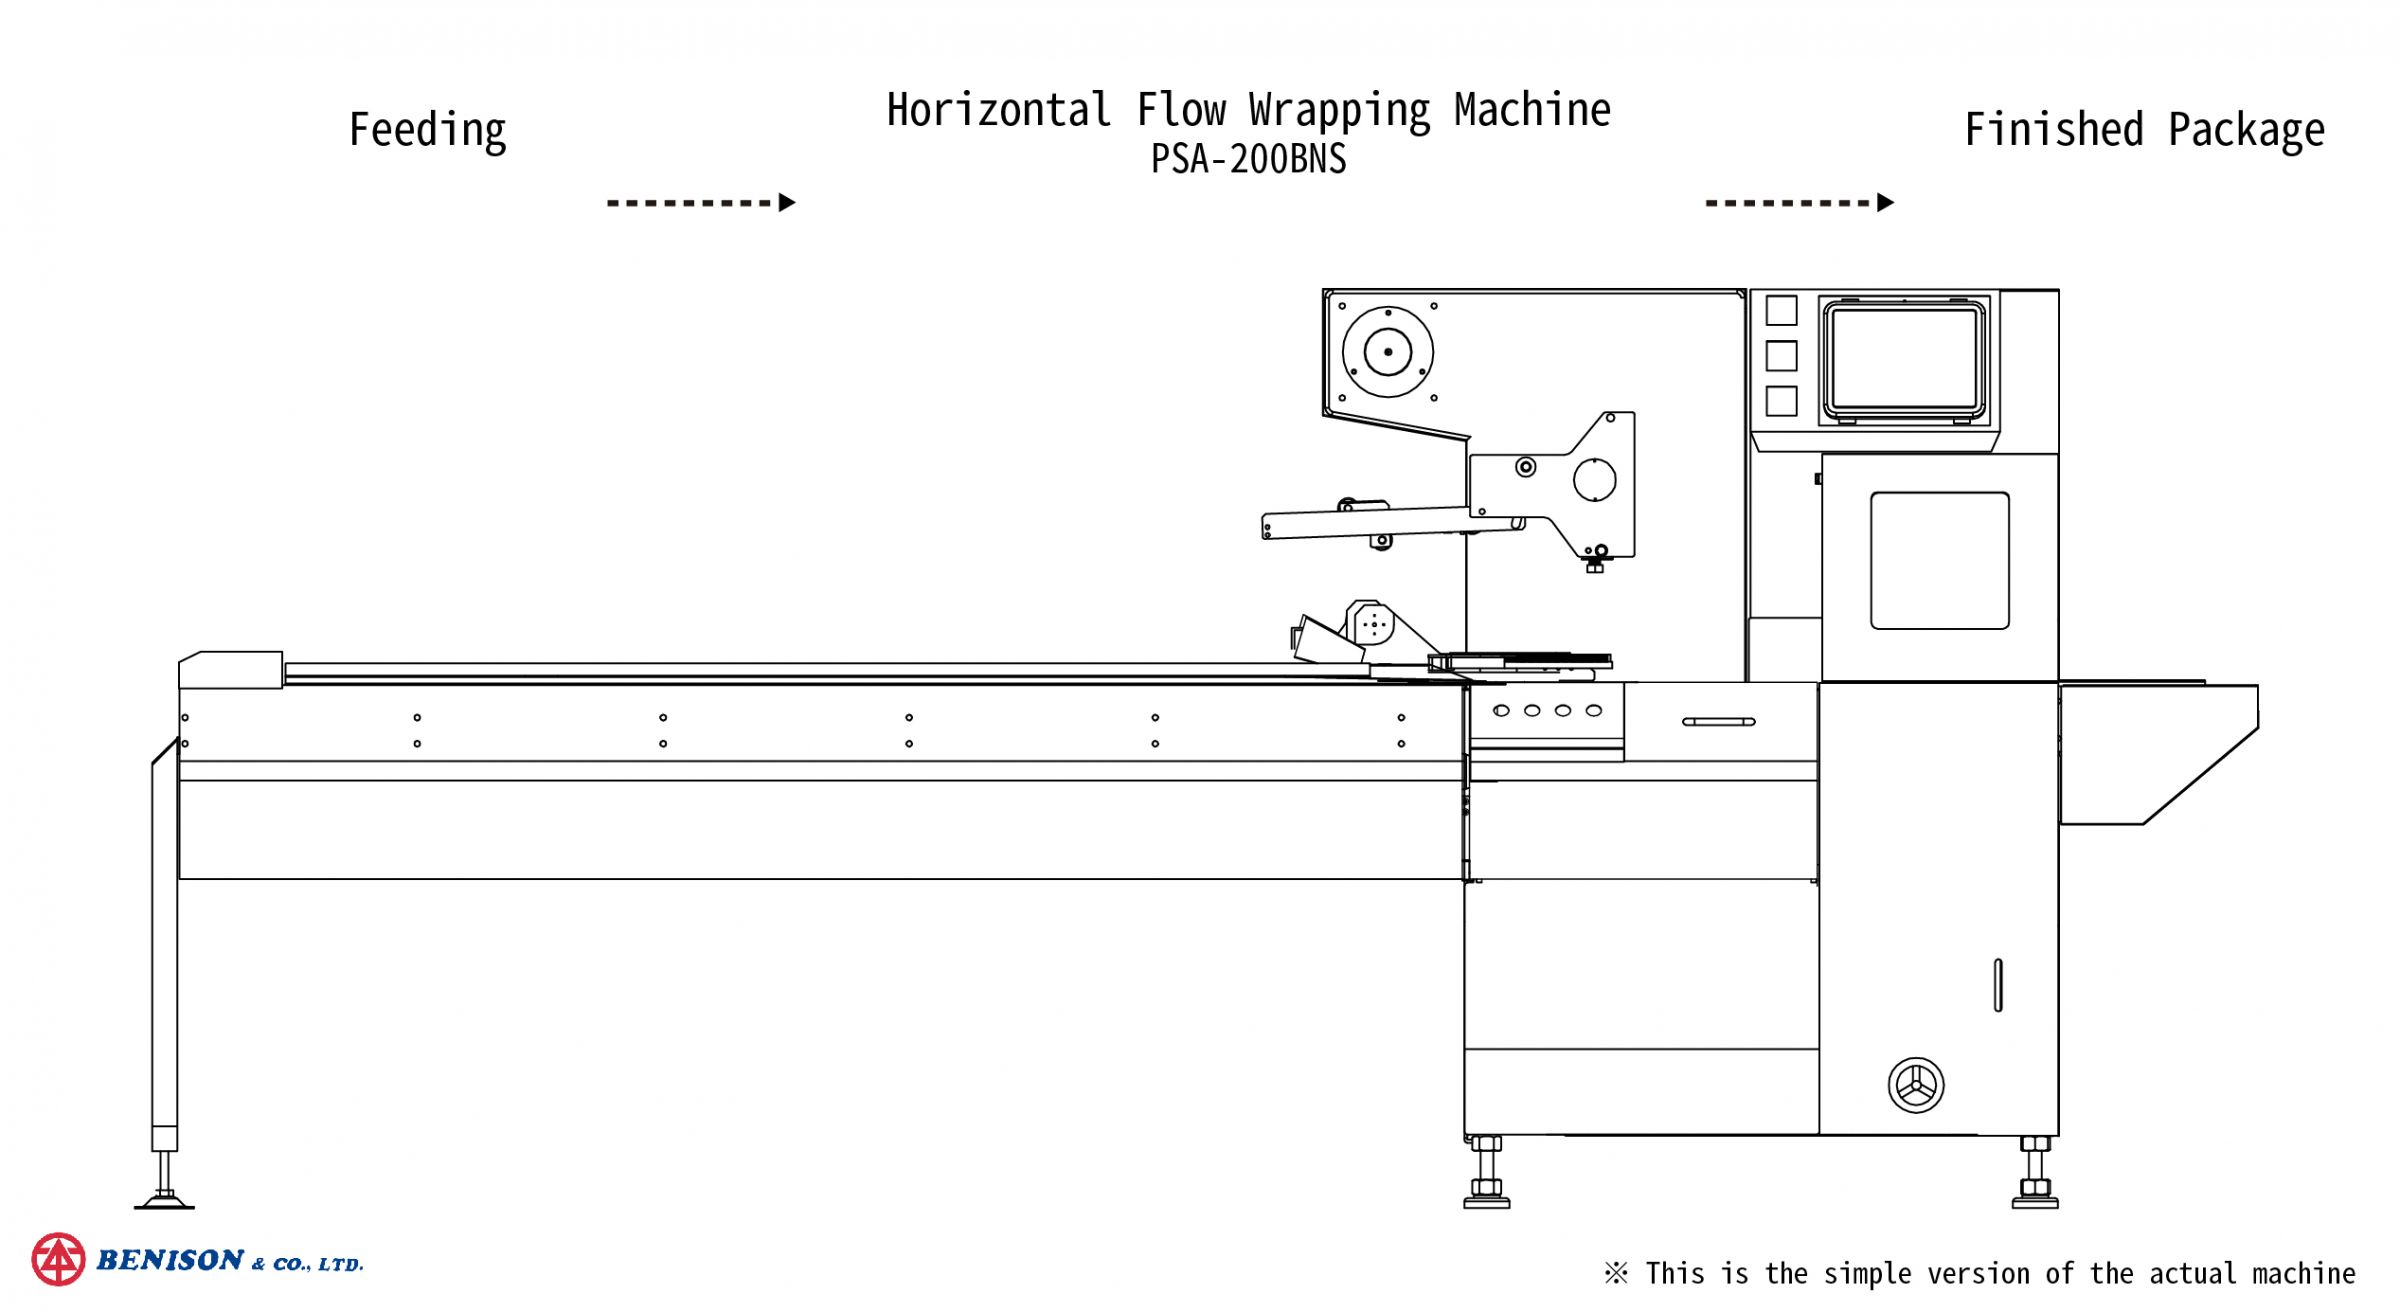 Horizontal Flow Wrapping Machine, PSA-200BNS for mask packaging solution